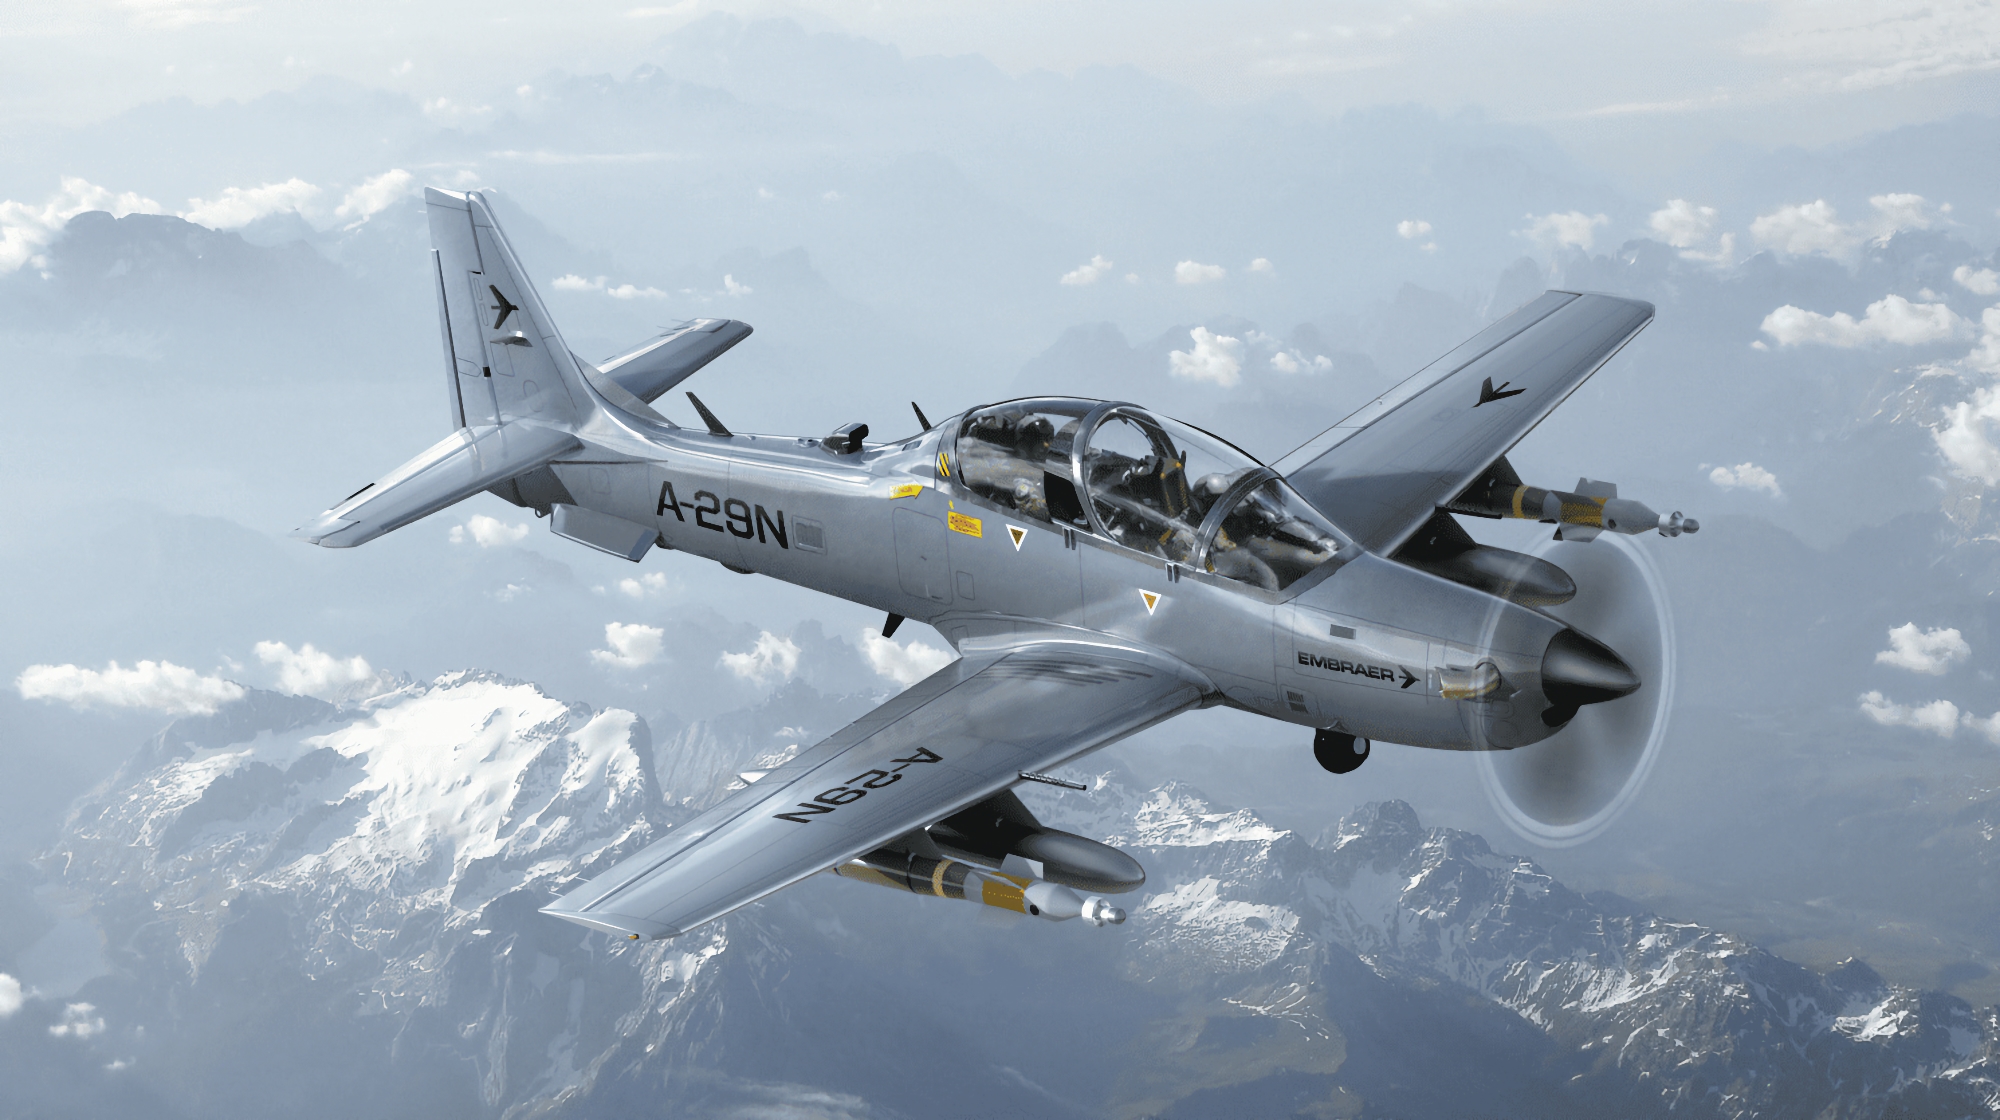 $100 million contract: Uruguay buys A-29 Super Tucano light turboprop attack aircraft